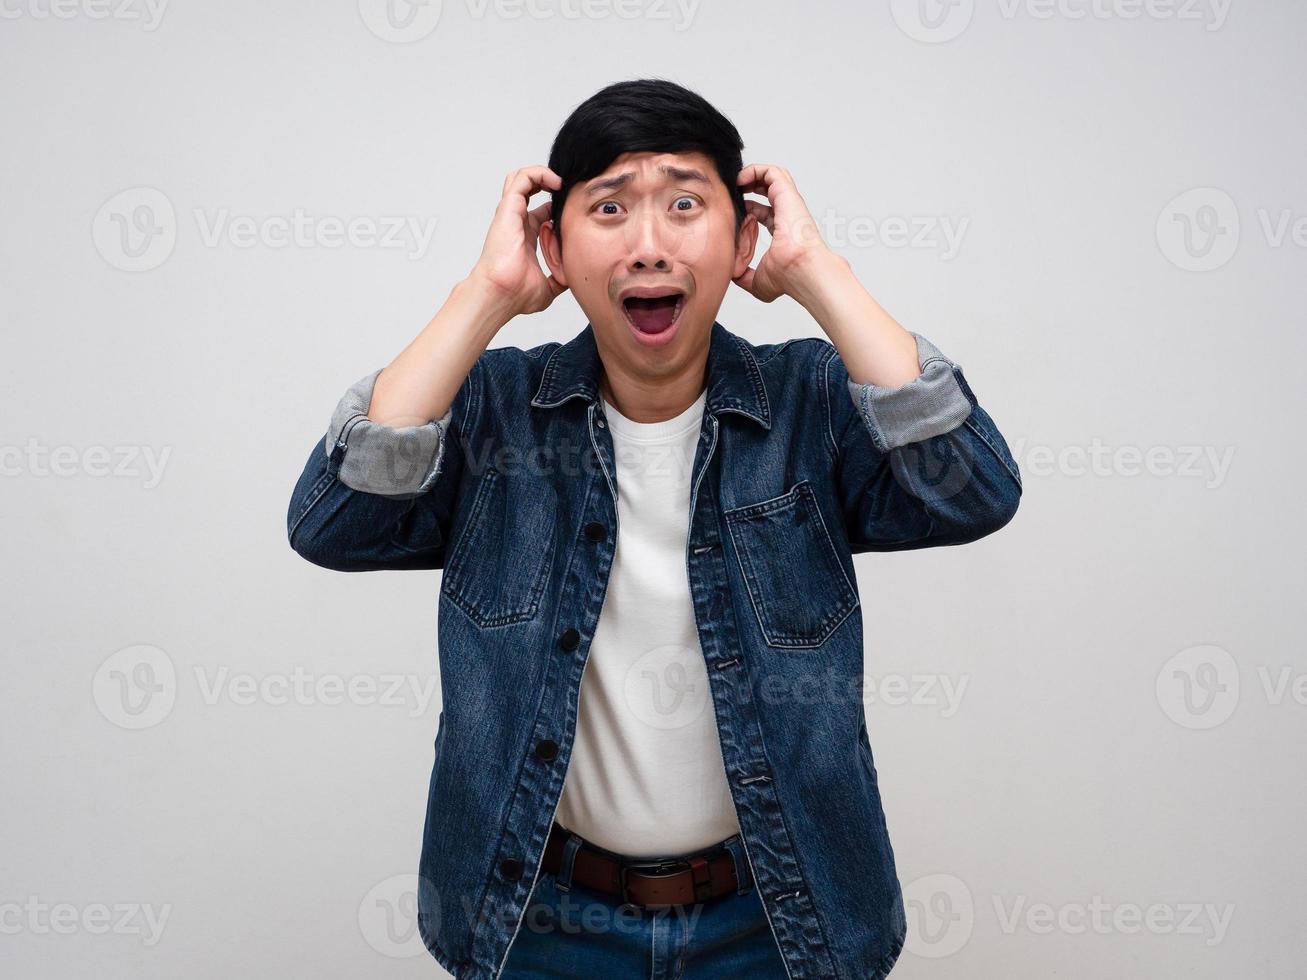 Asian man jeans shirt gesture hold his head feels shocked isolated photo